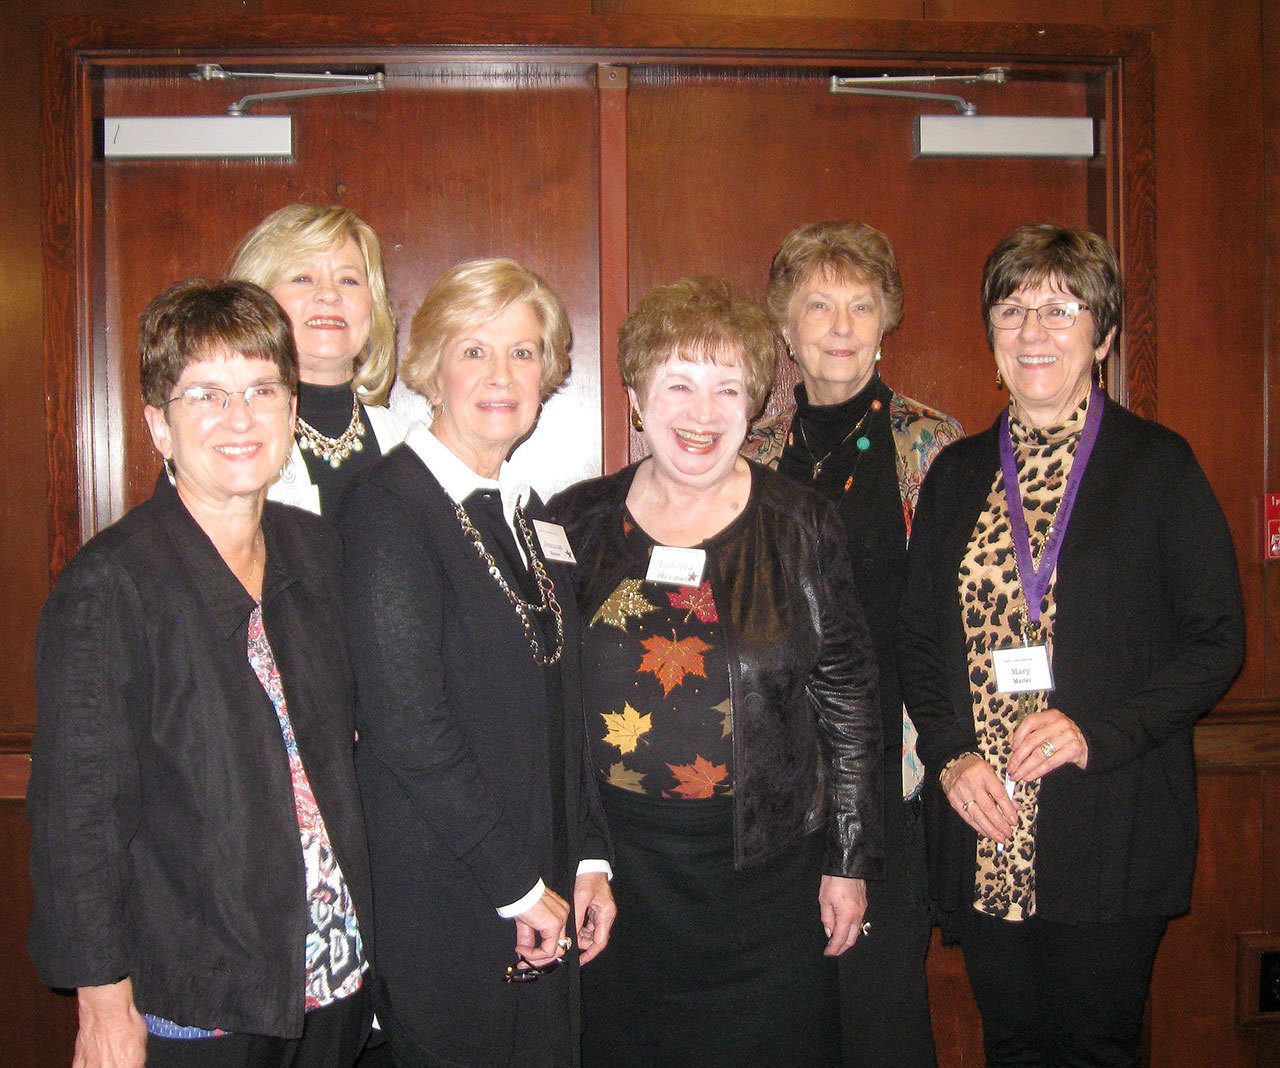 The Women’s Club of Federal Way to meet